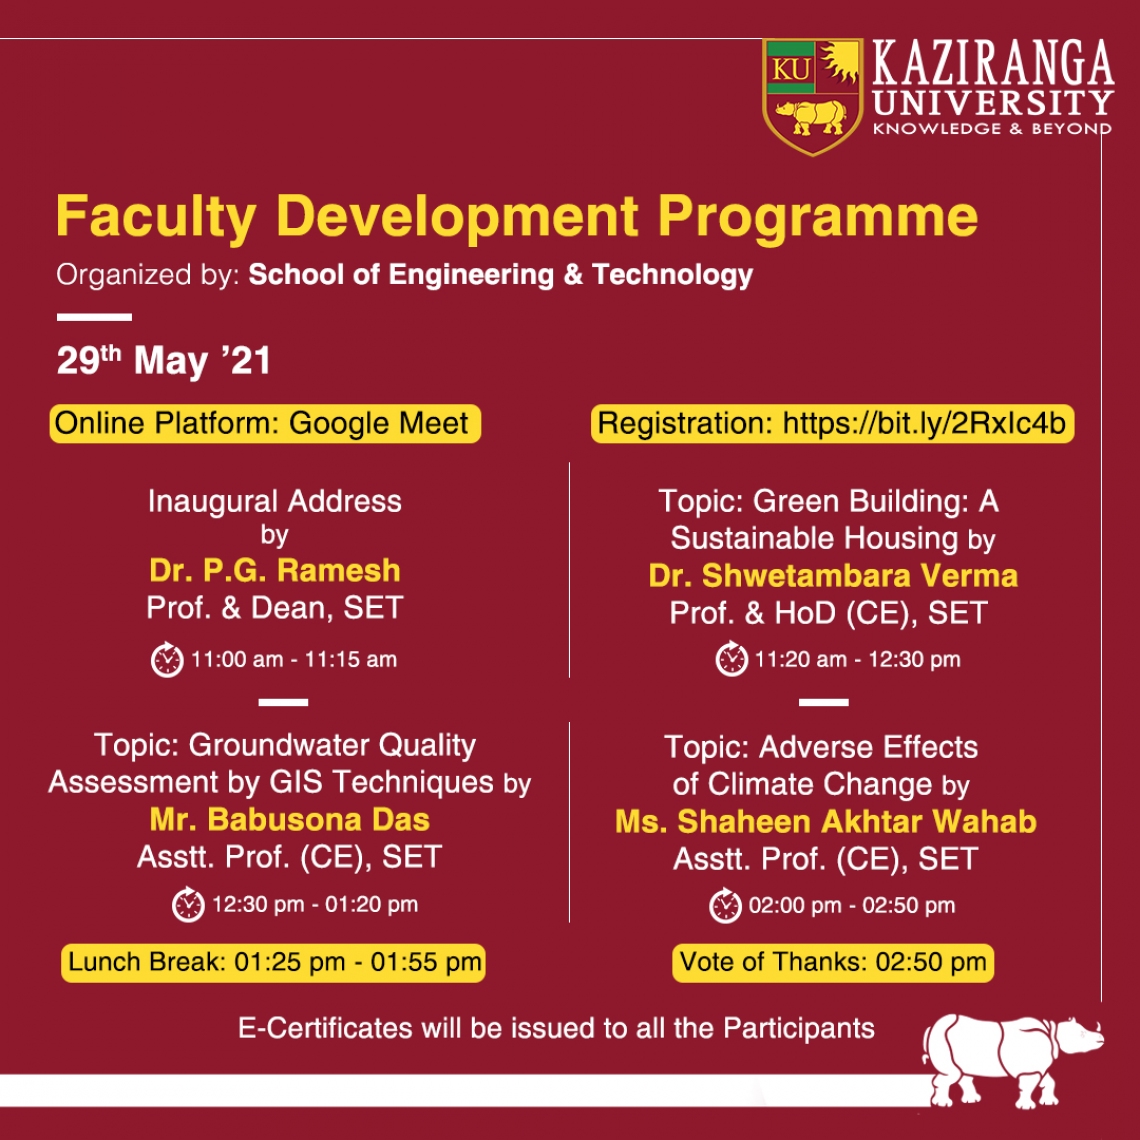 The Faculty Development Programme (FDP) organized by the Department of Civil Engineering, School of Engineering and Technology, Kaziranga University